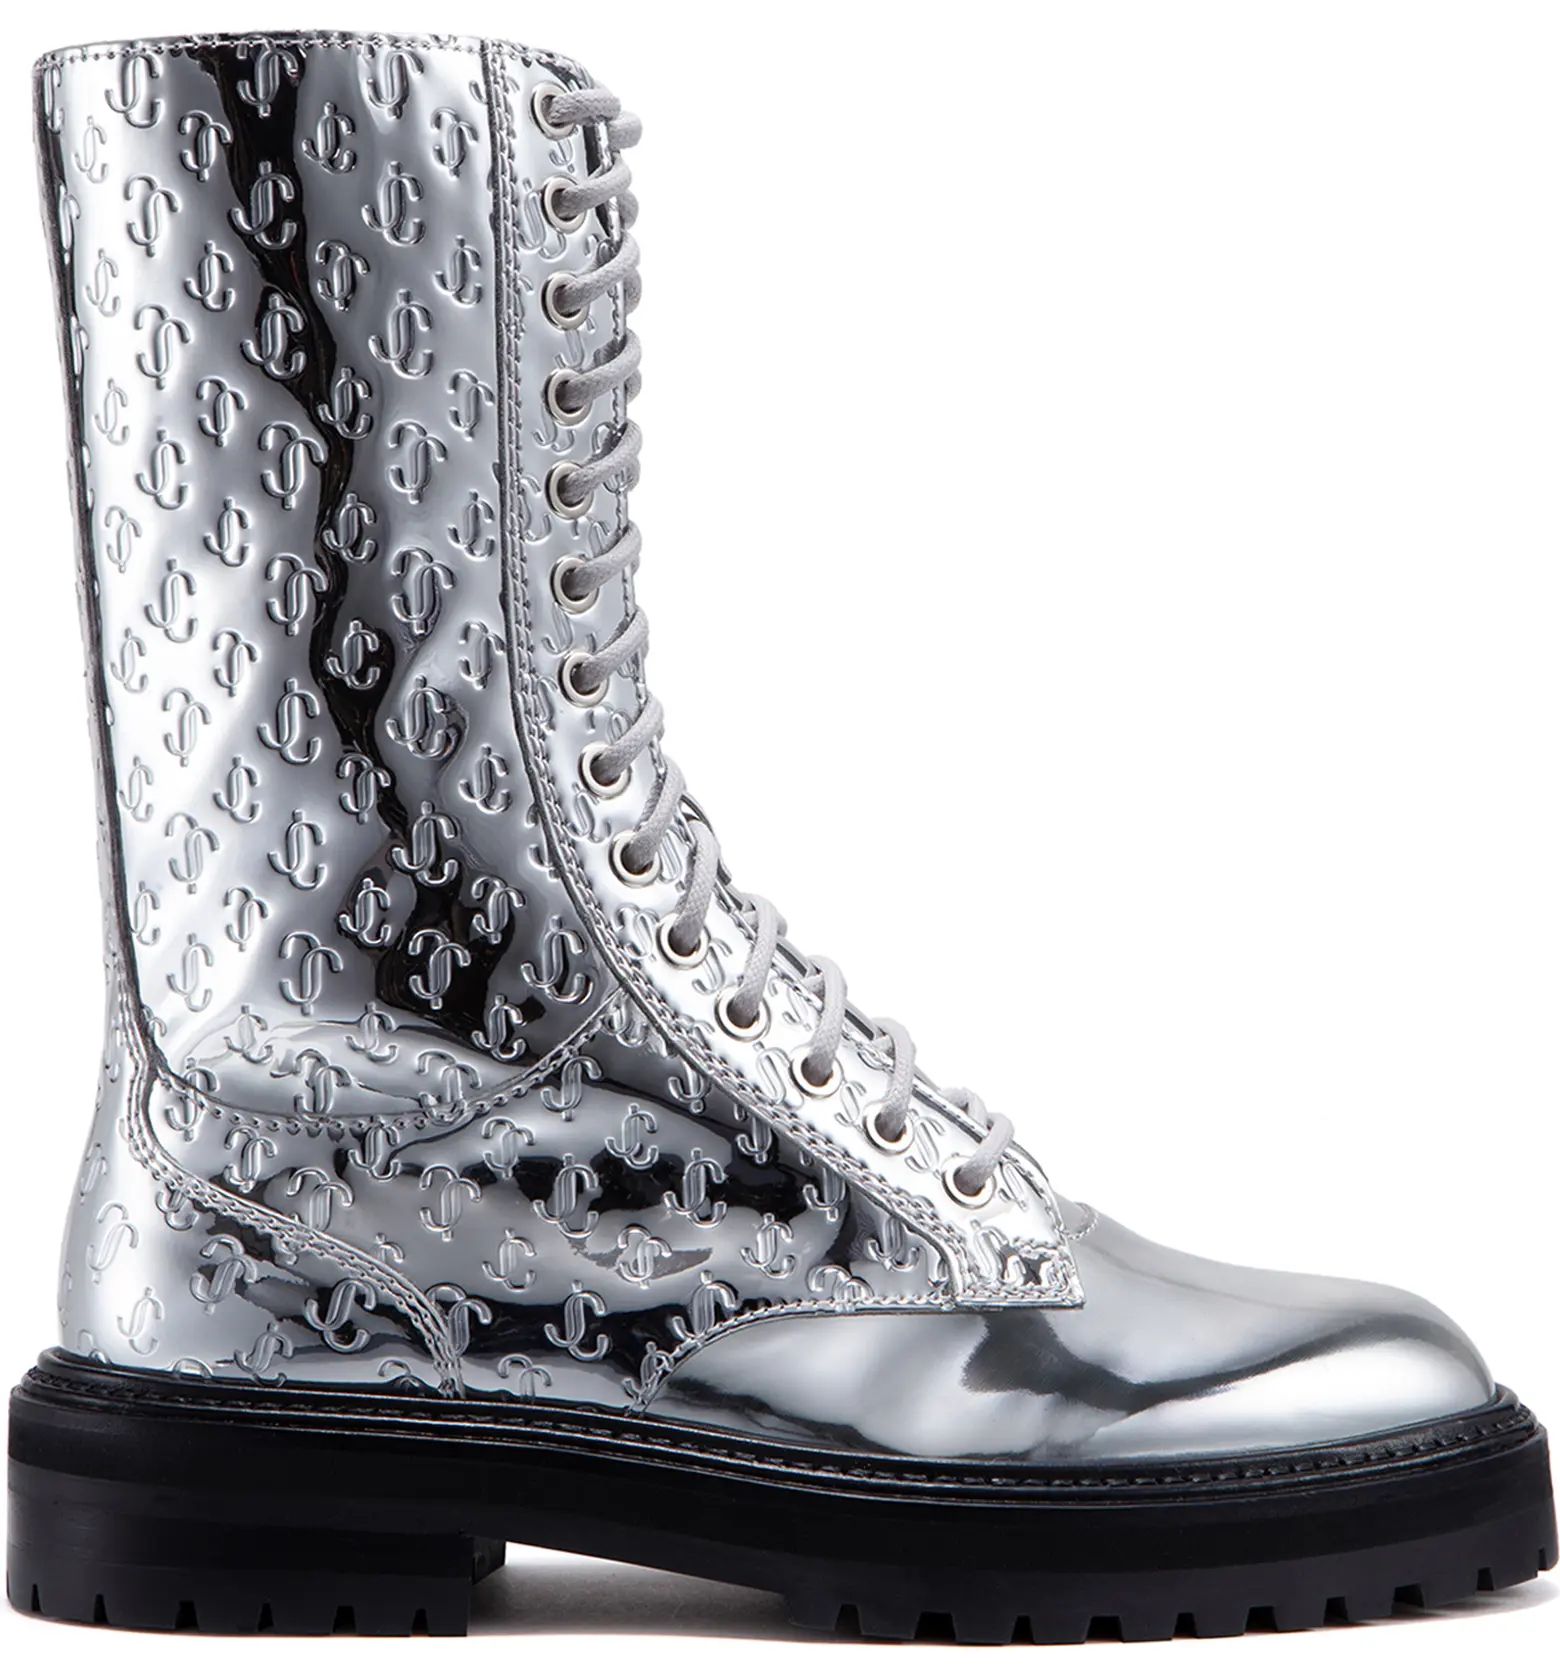 Cora Mirrored Leather Boot (Women) | Nordstrom Rack